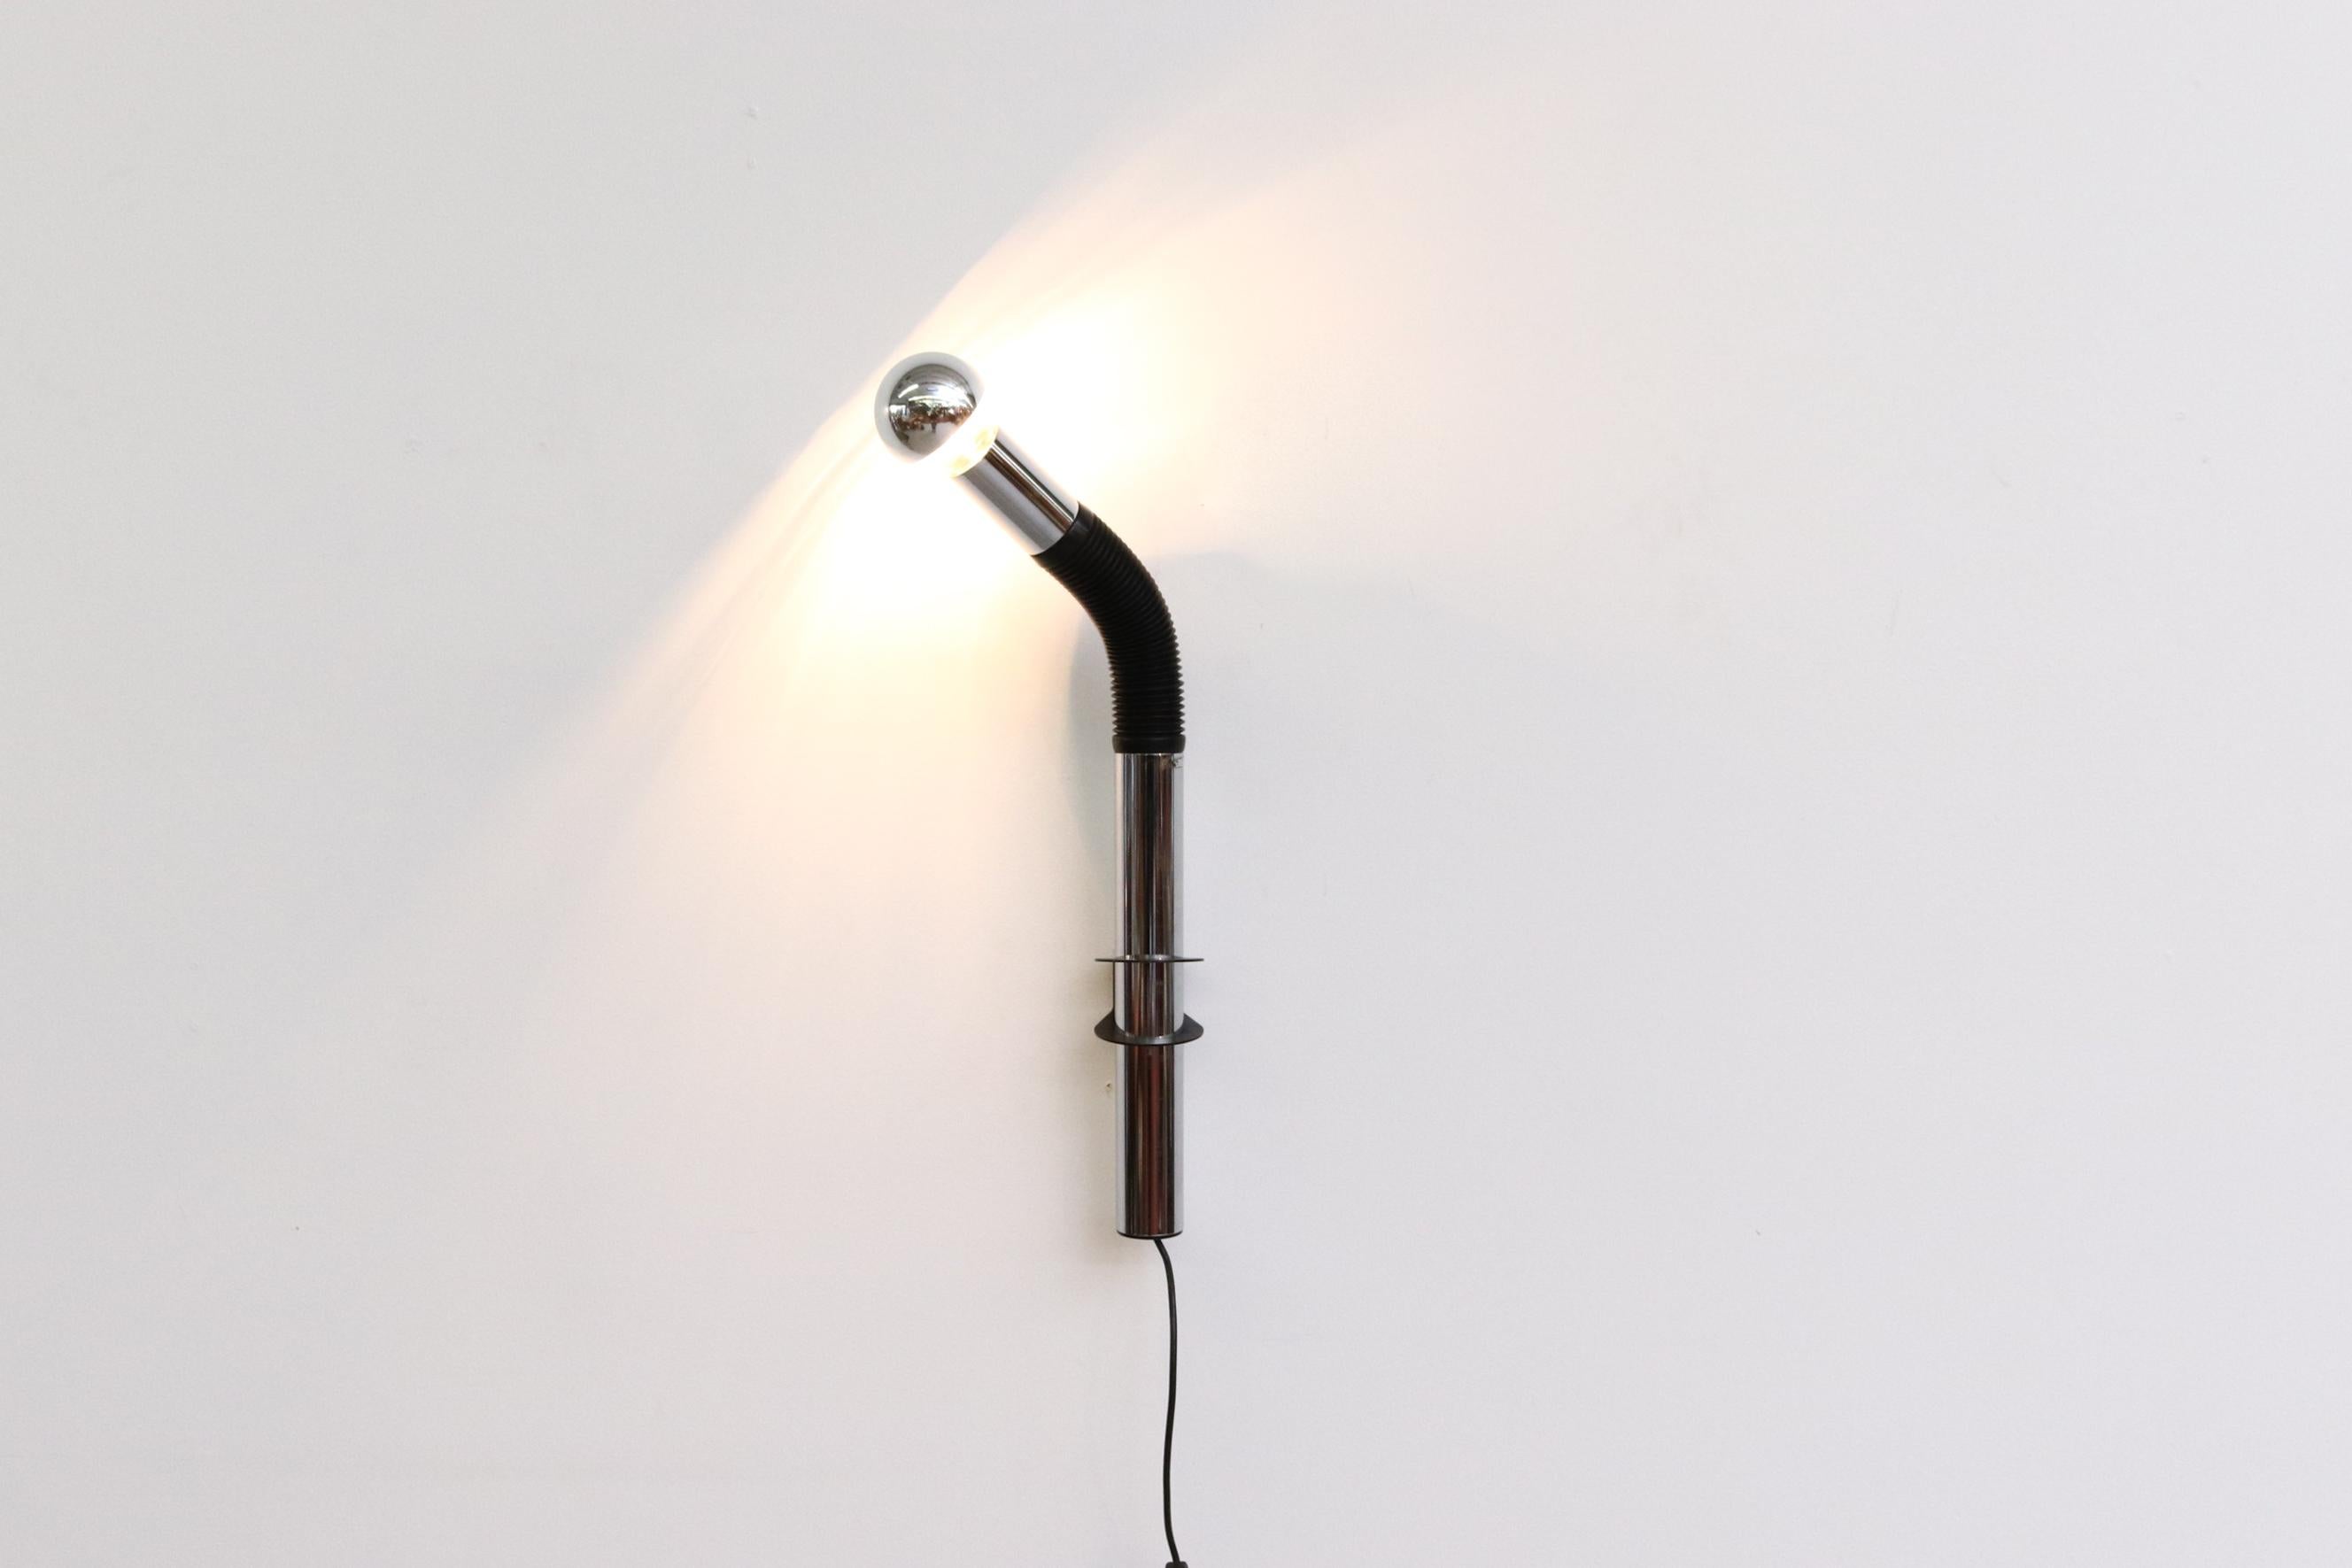 E. Bellini chrome and black goose neck wall mount spot lamp with adjustable height for Targetti Sankey, Italy, 1970s. Original manufacturer sticker, partially intact. Shown with a chrome tip bulb, not included. In original condition with some